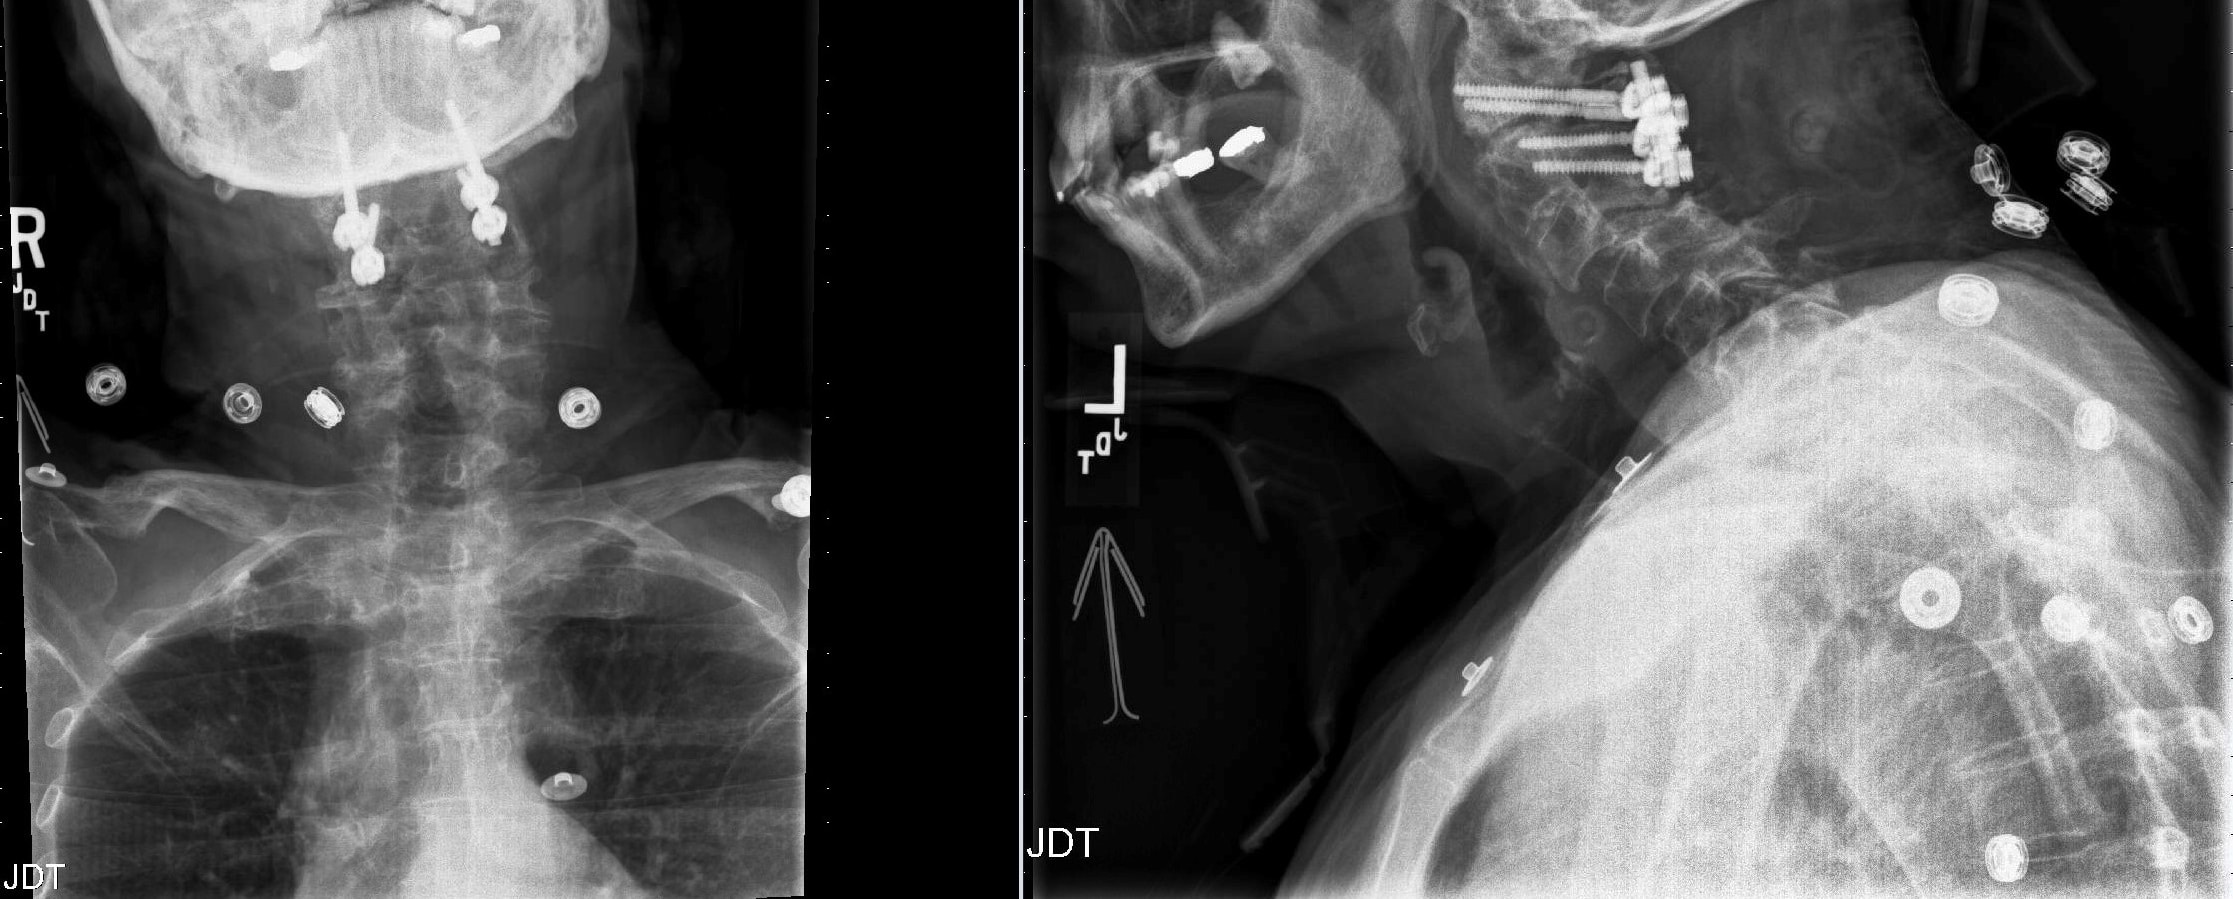 Post-operative X-rays after C1-2 fusion and decompression surgery